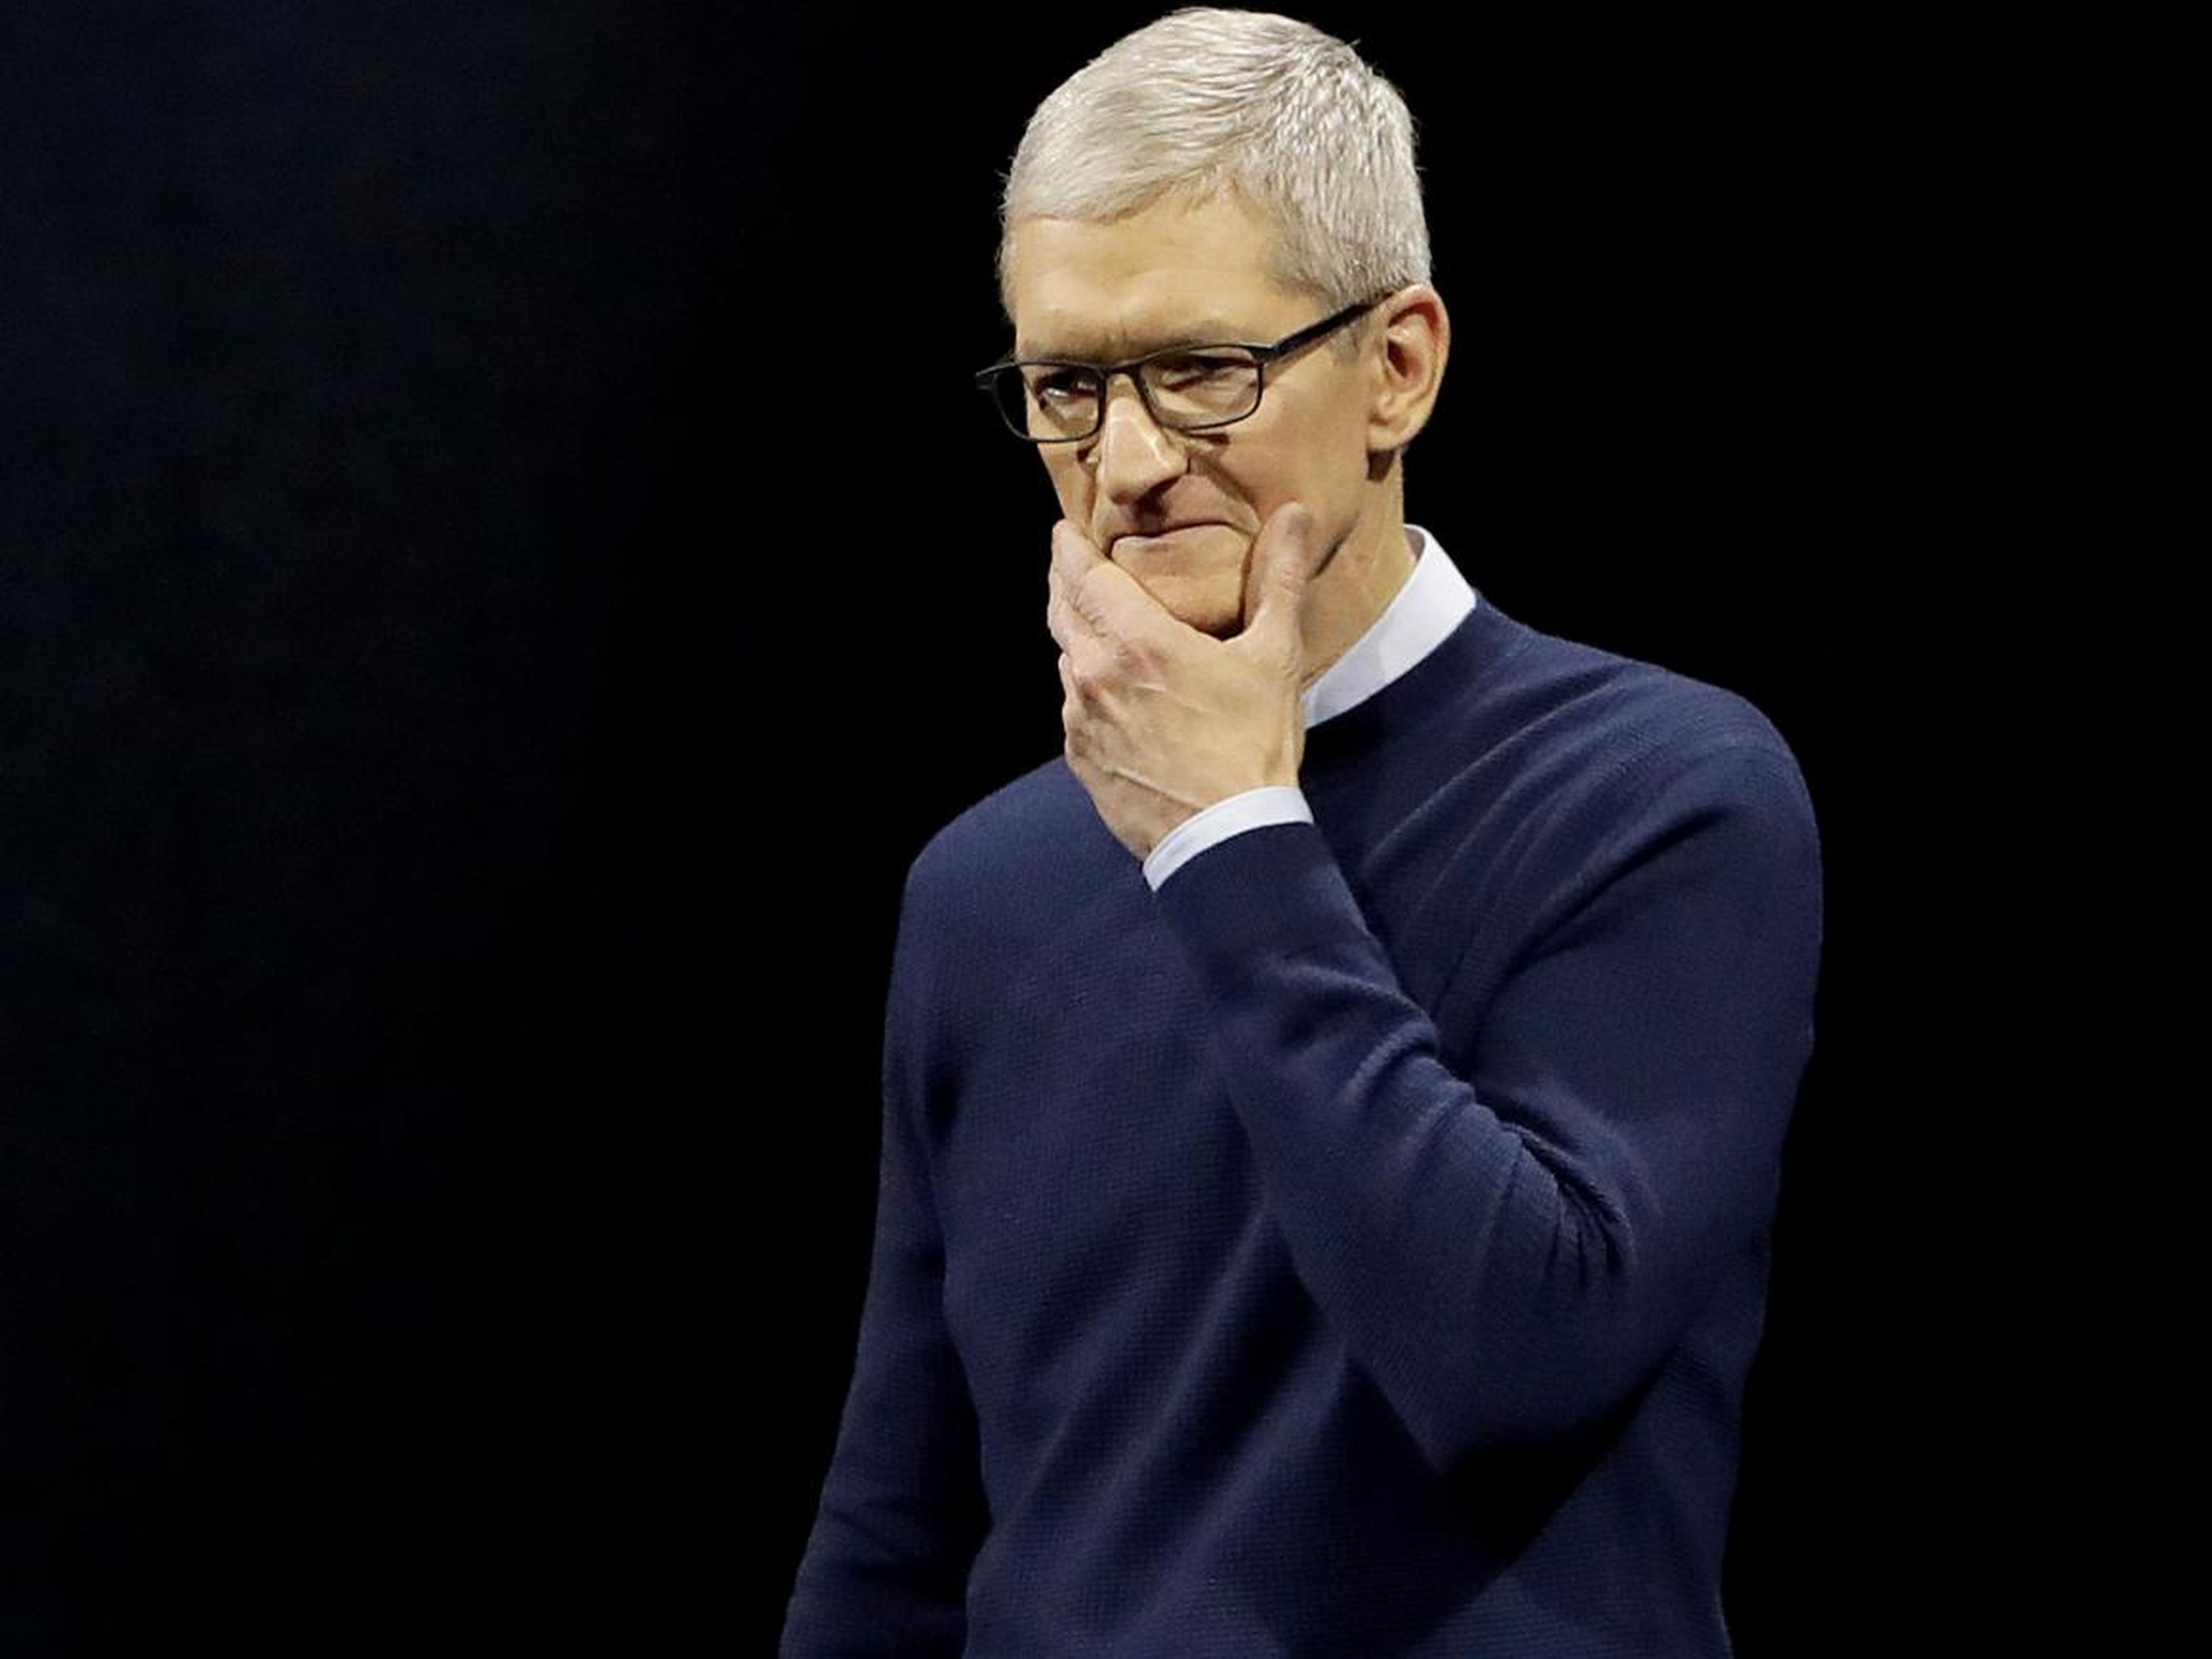 Tim Cook, CEO of Apple, which is reportedly seeing disappointing sales of its latest iPhones.